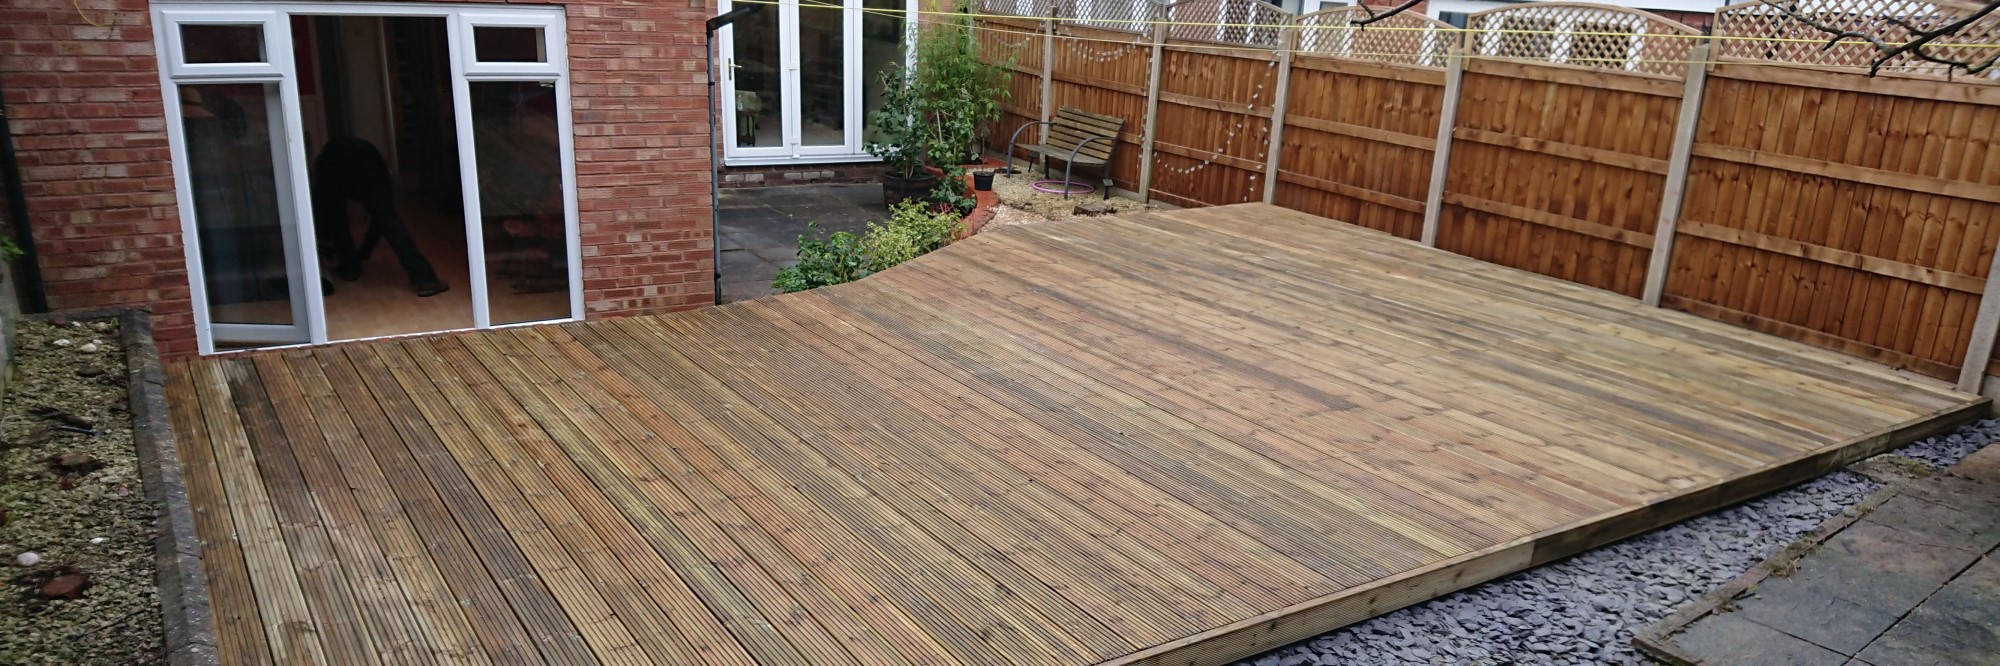 Decking DG Services Landscaping Gardening Bromsgrove Droitwich